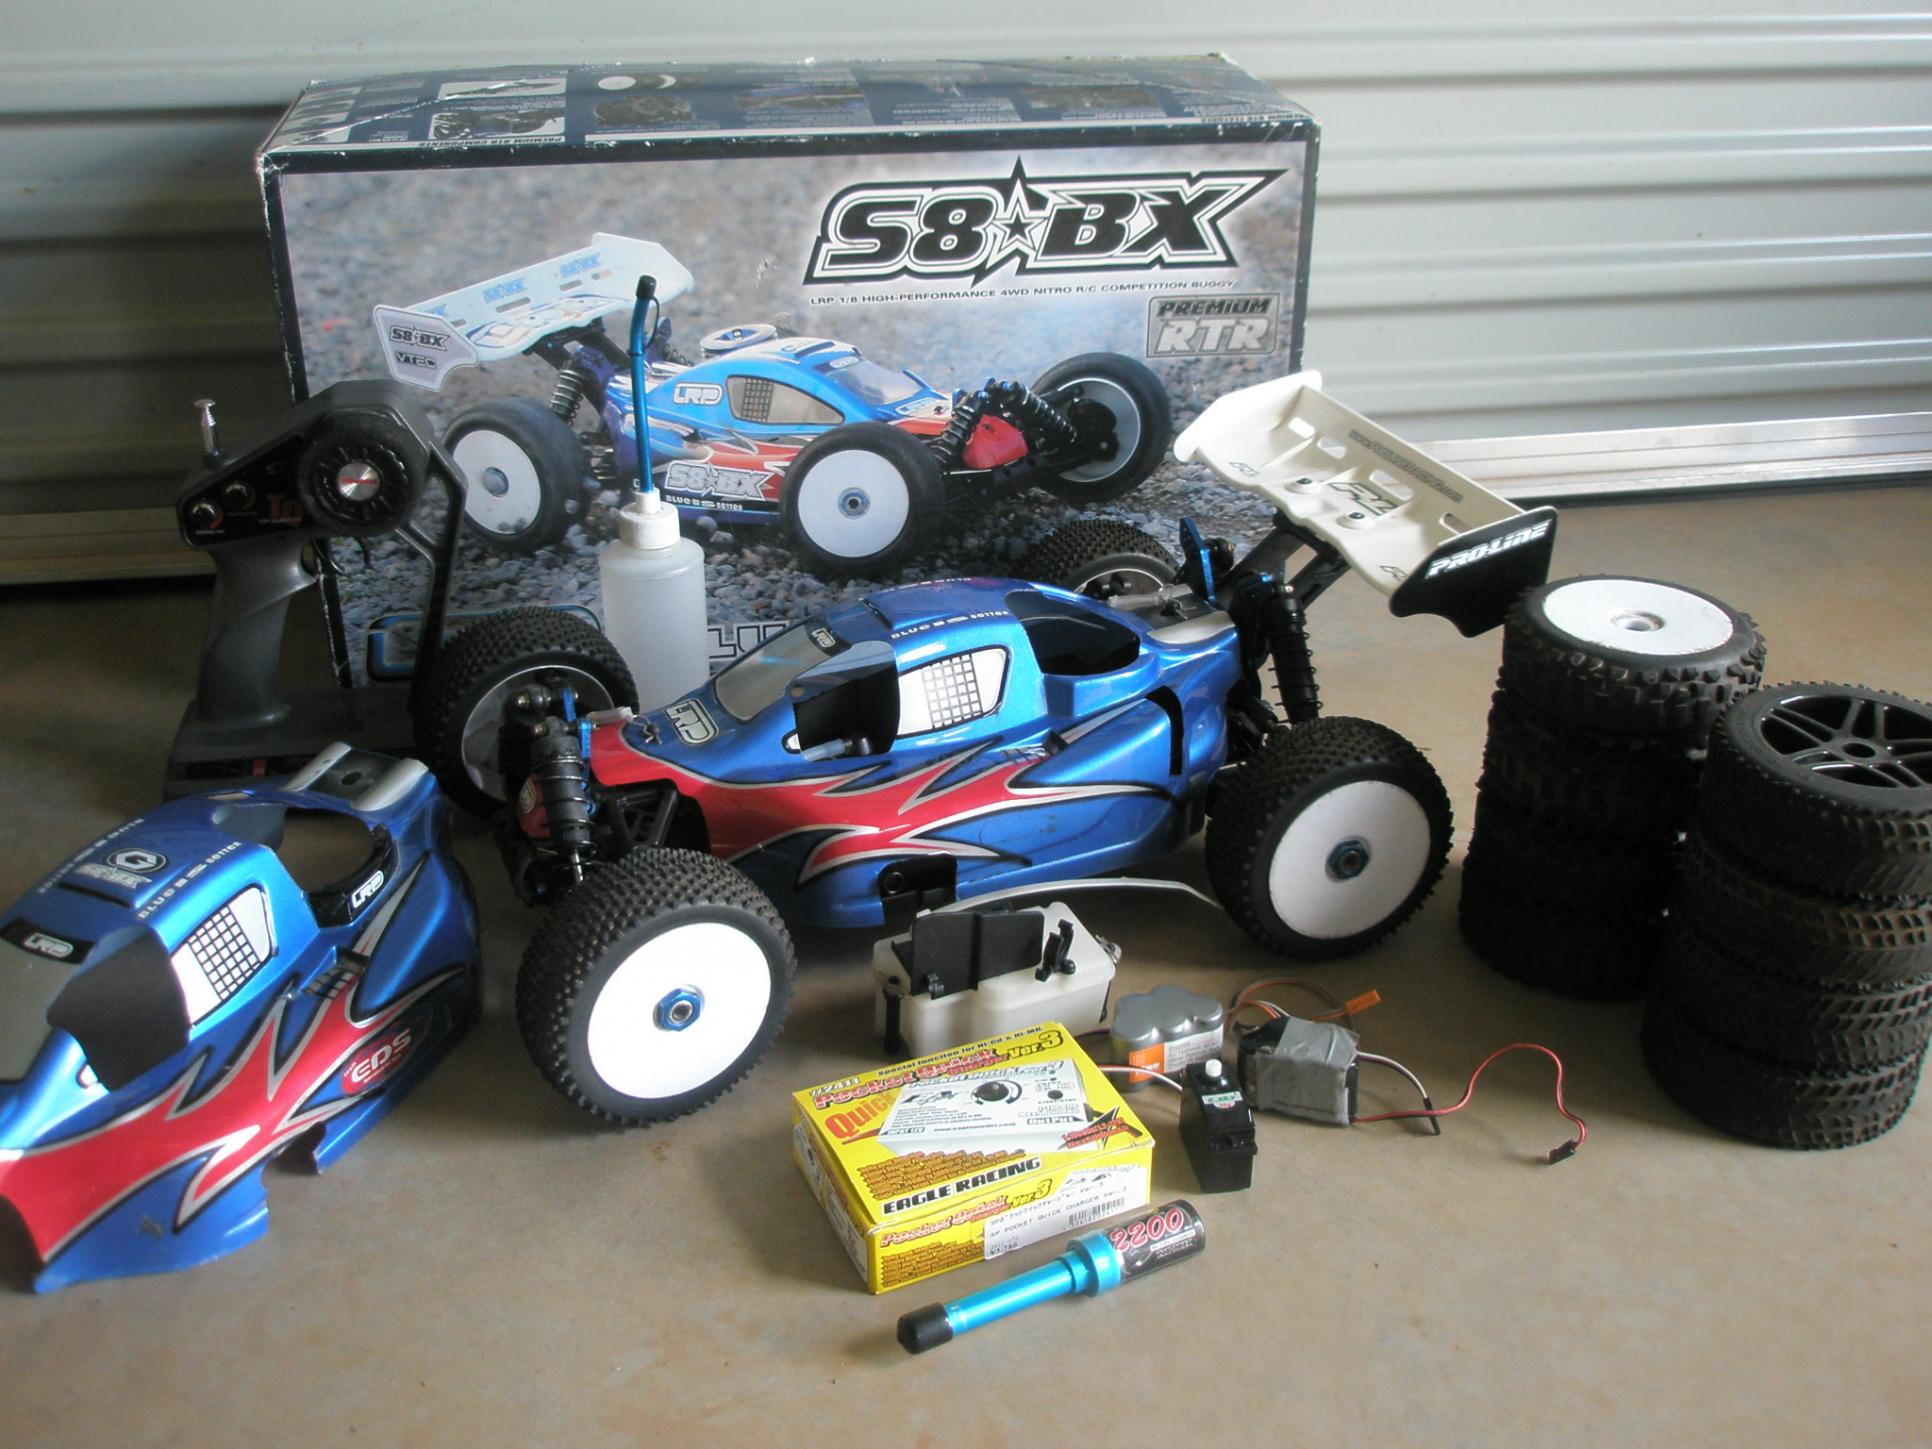 LRP S8 BX 1/8 Scale Nitro Buggy Rolling Chassis - R/C Tech Forums